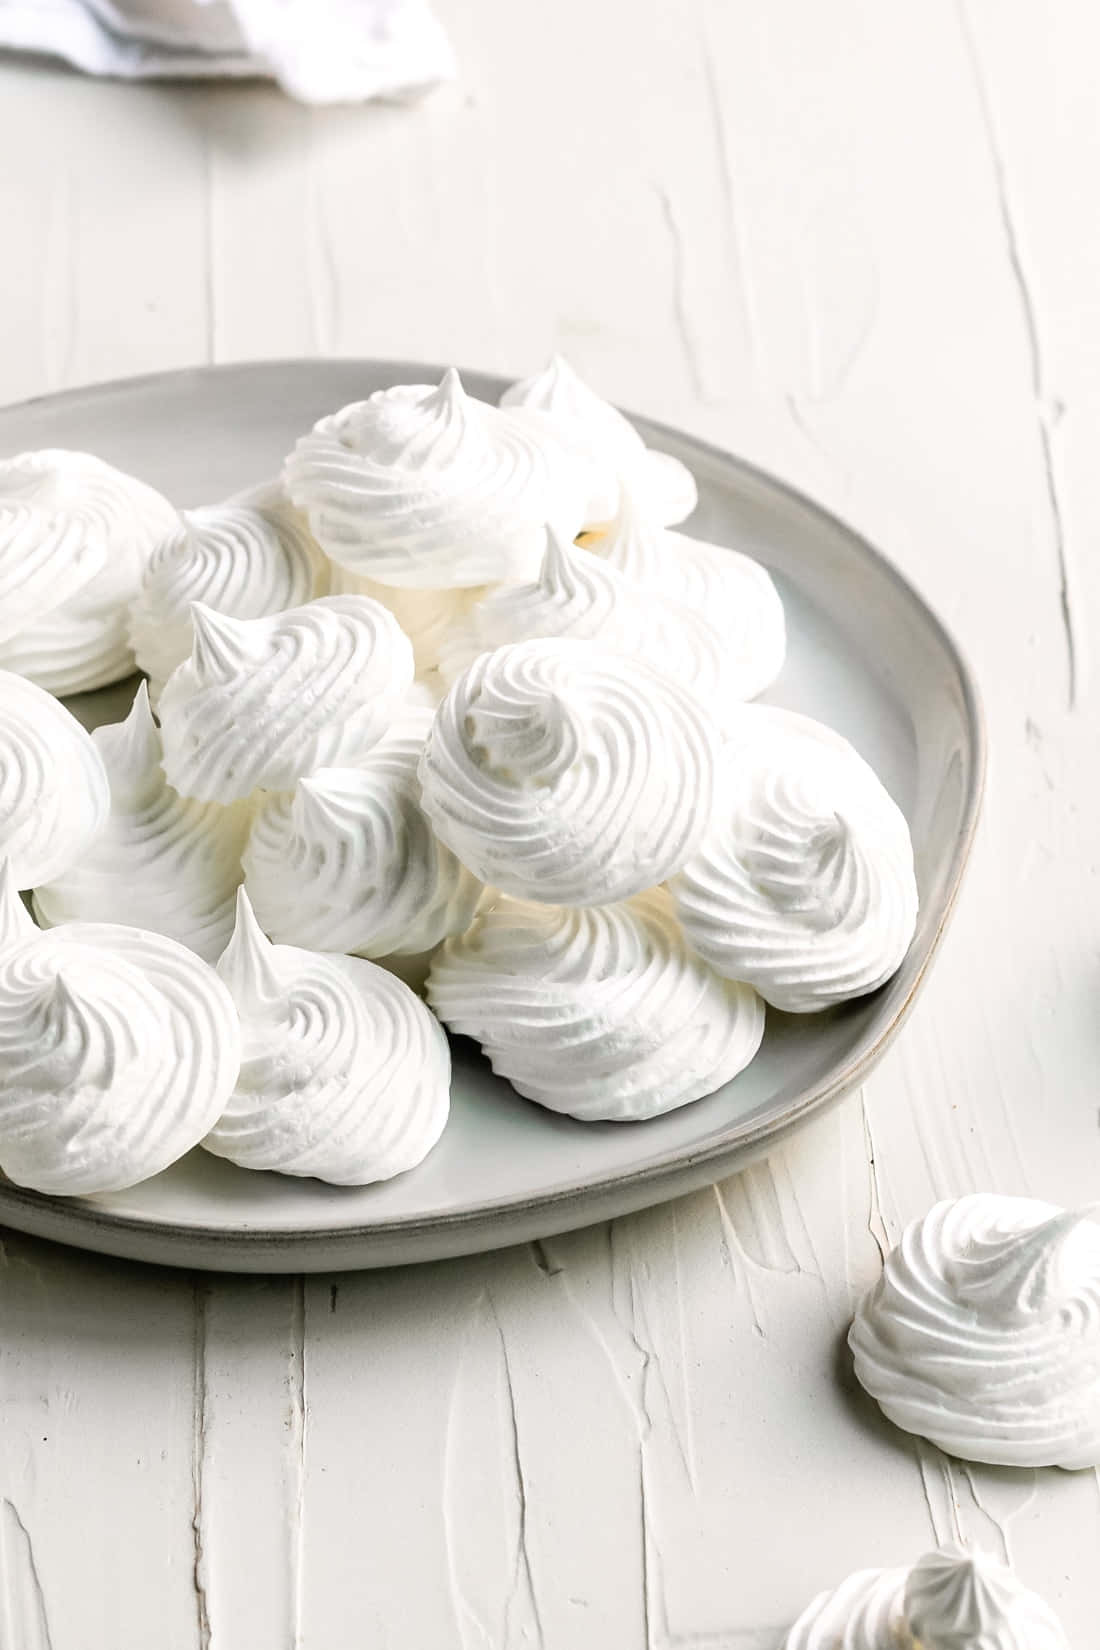 Sweet and tart meringue desserts deliciously arranged in a row. Wallpaper